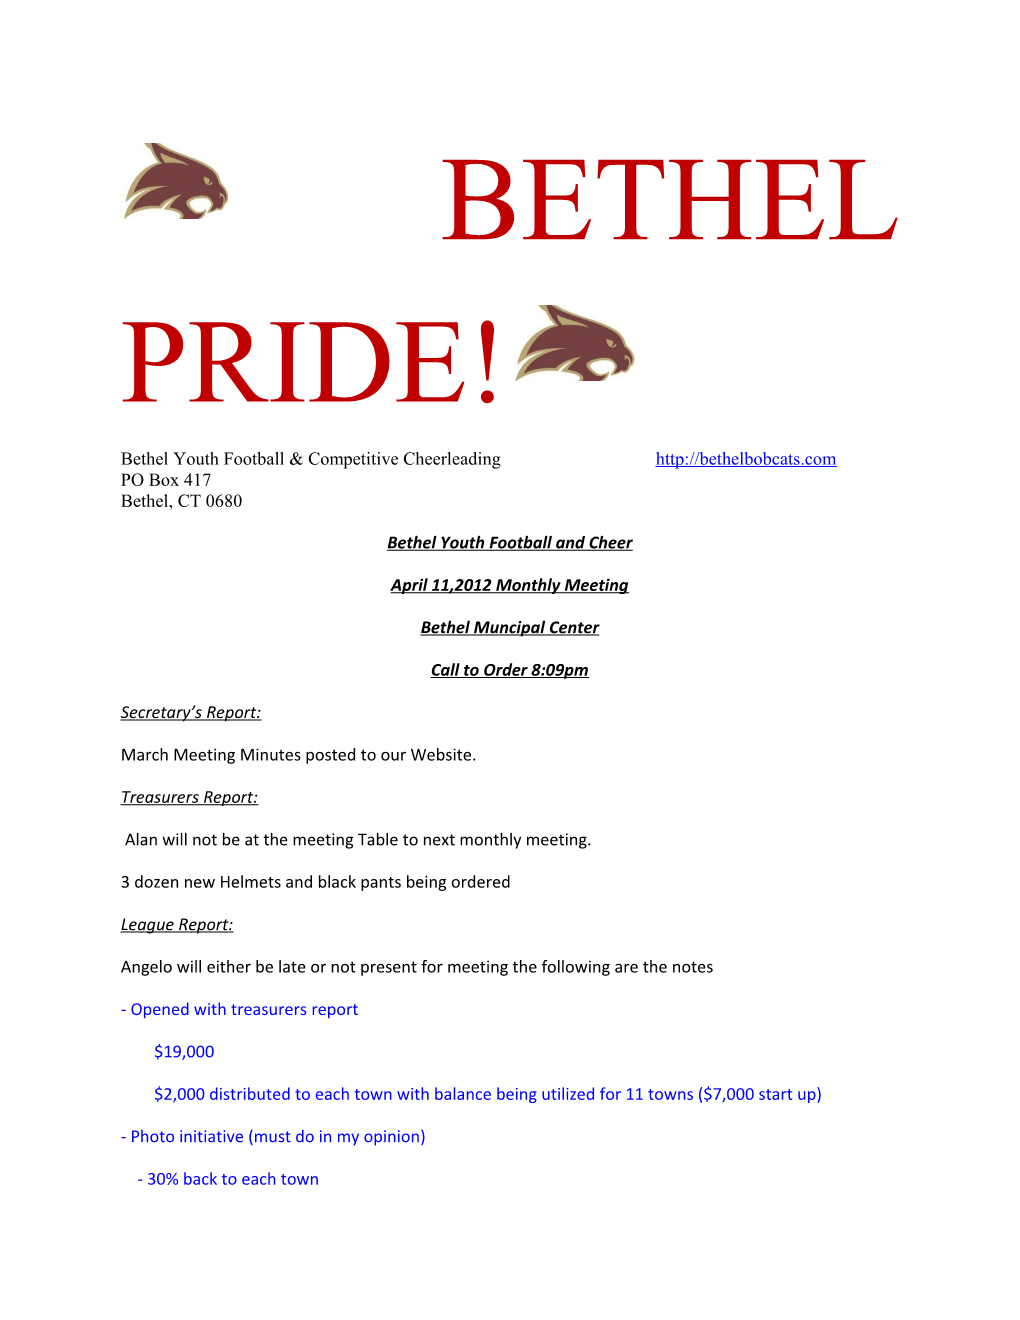 Bethel Youth Football & Competitive Cheerleading